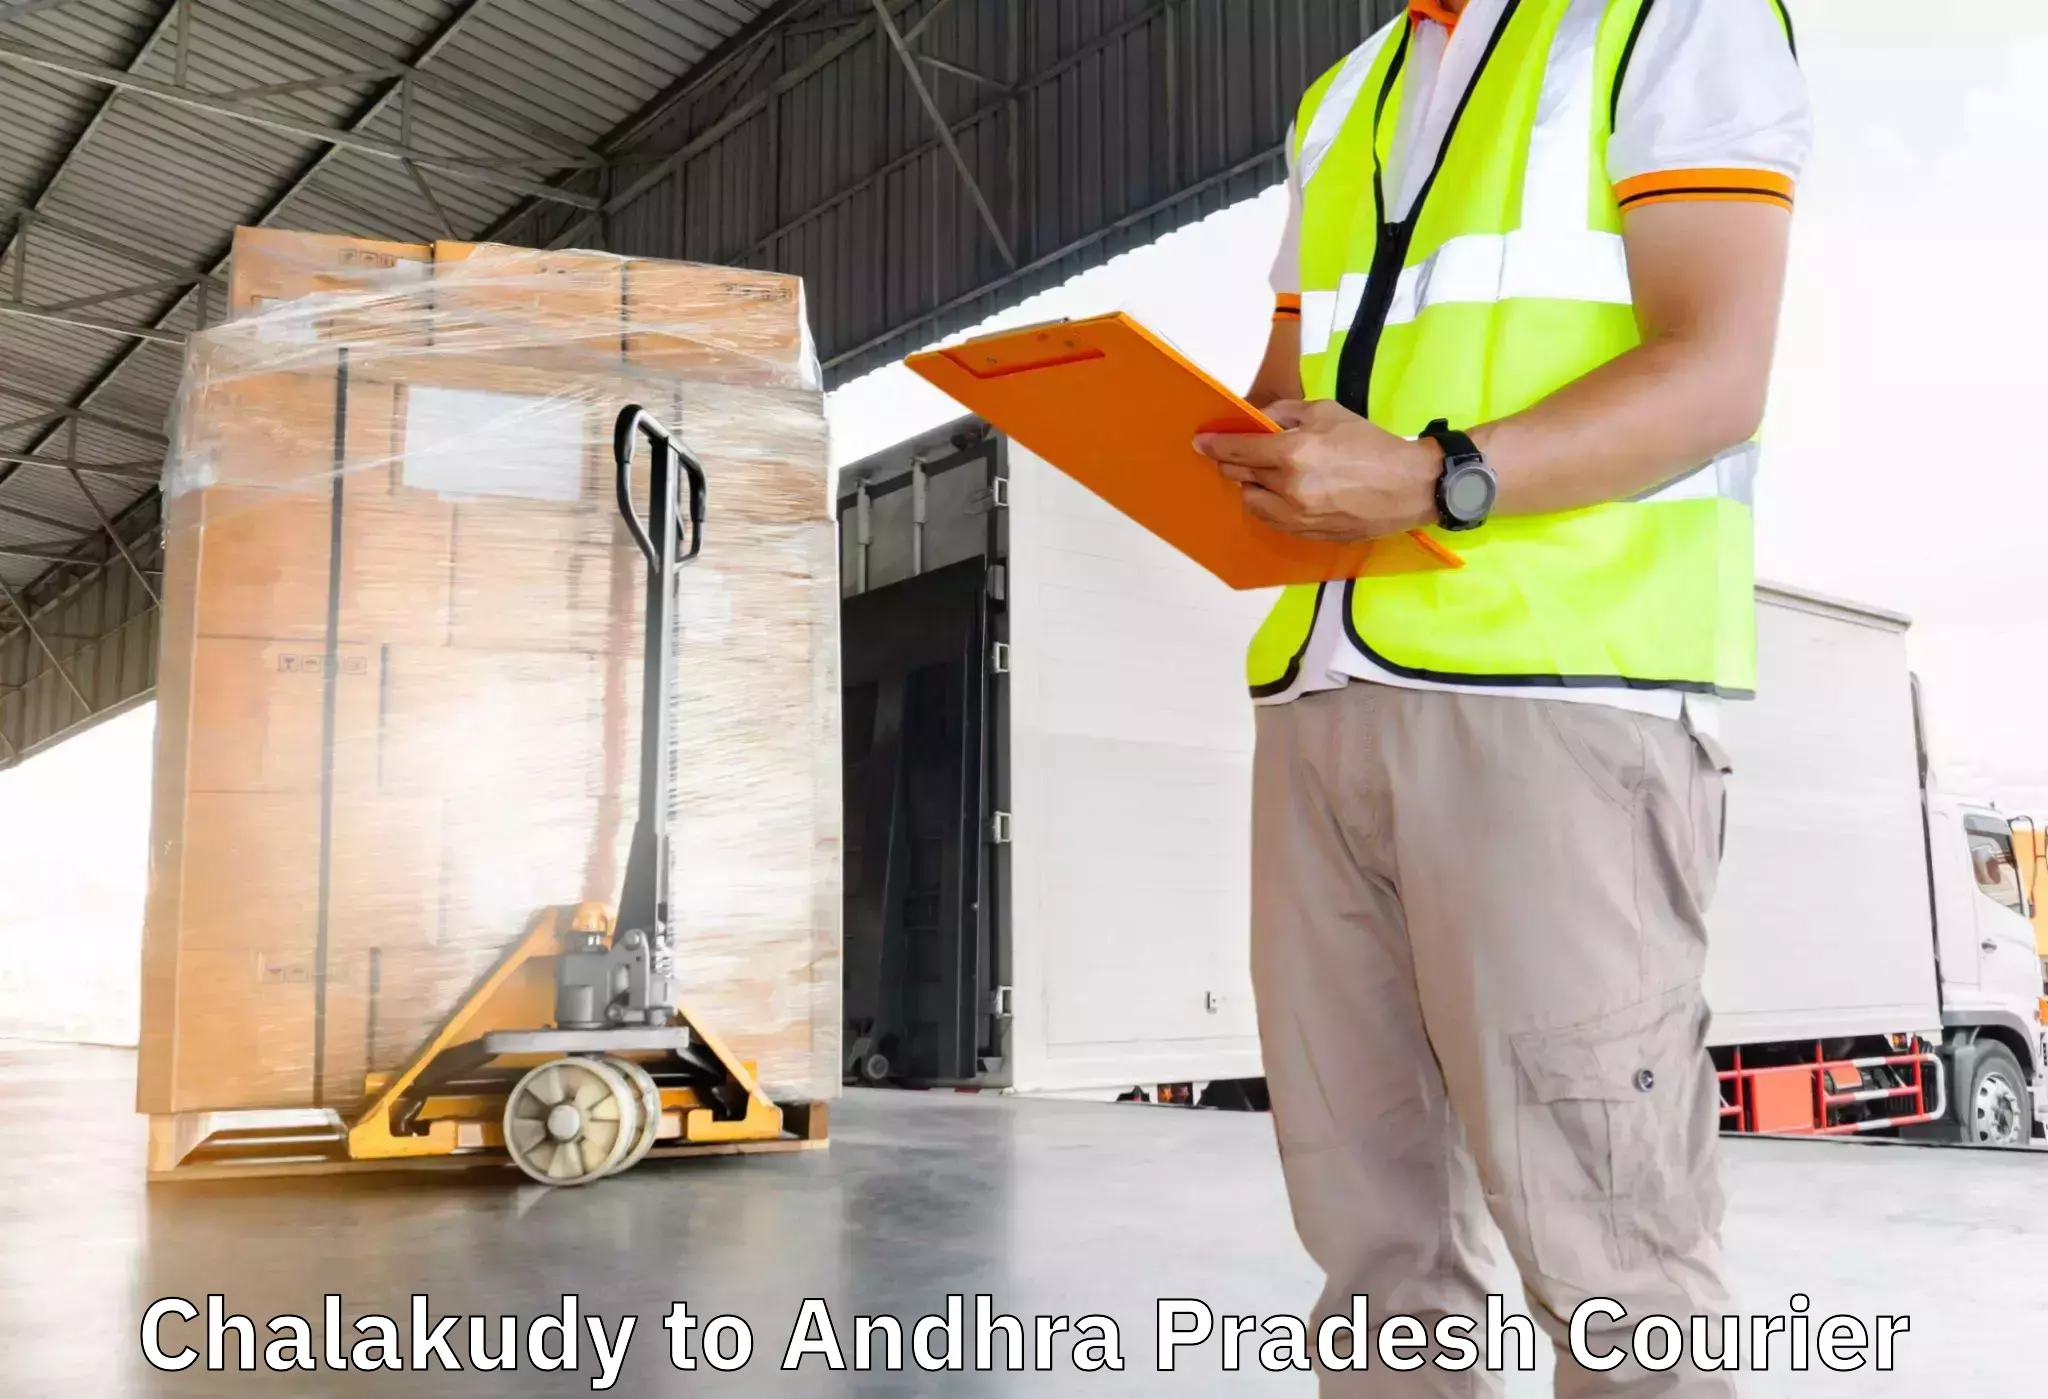 Furniture relocation experts Chalakudy to Kakinada